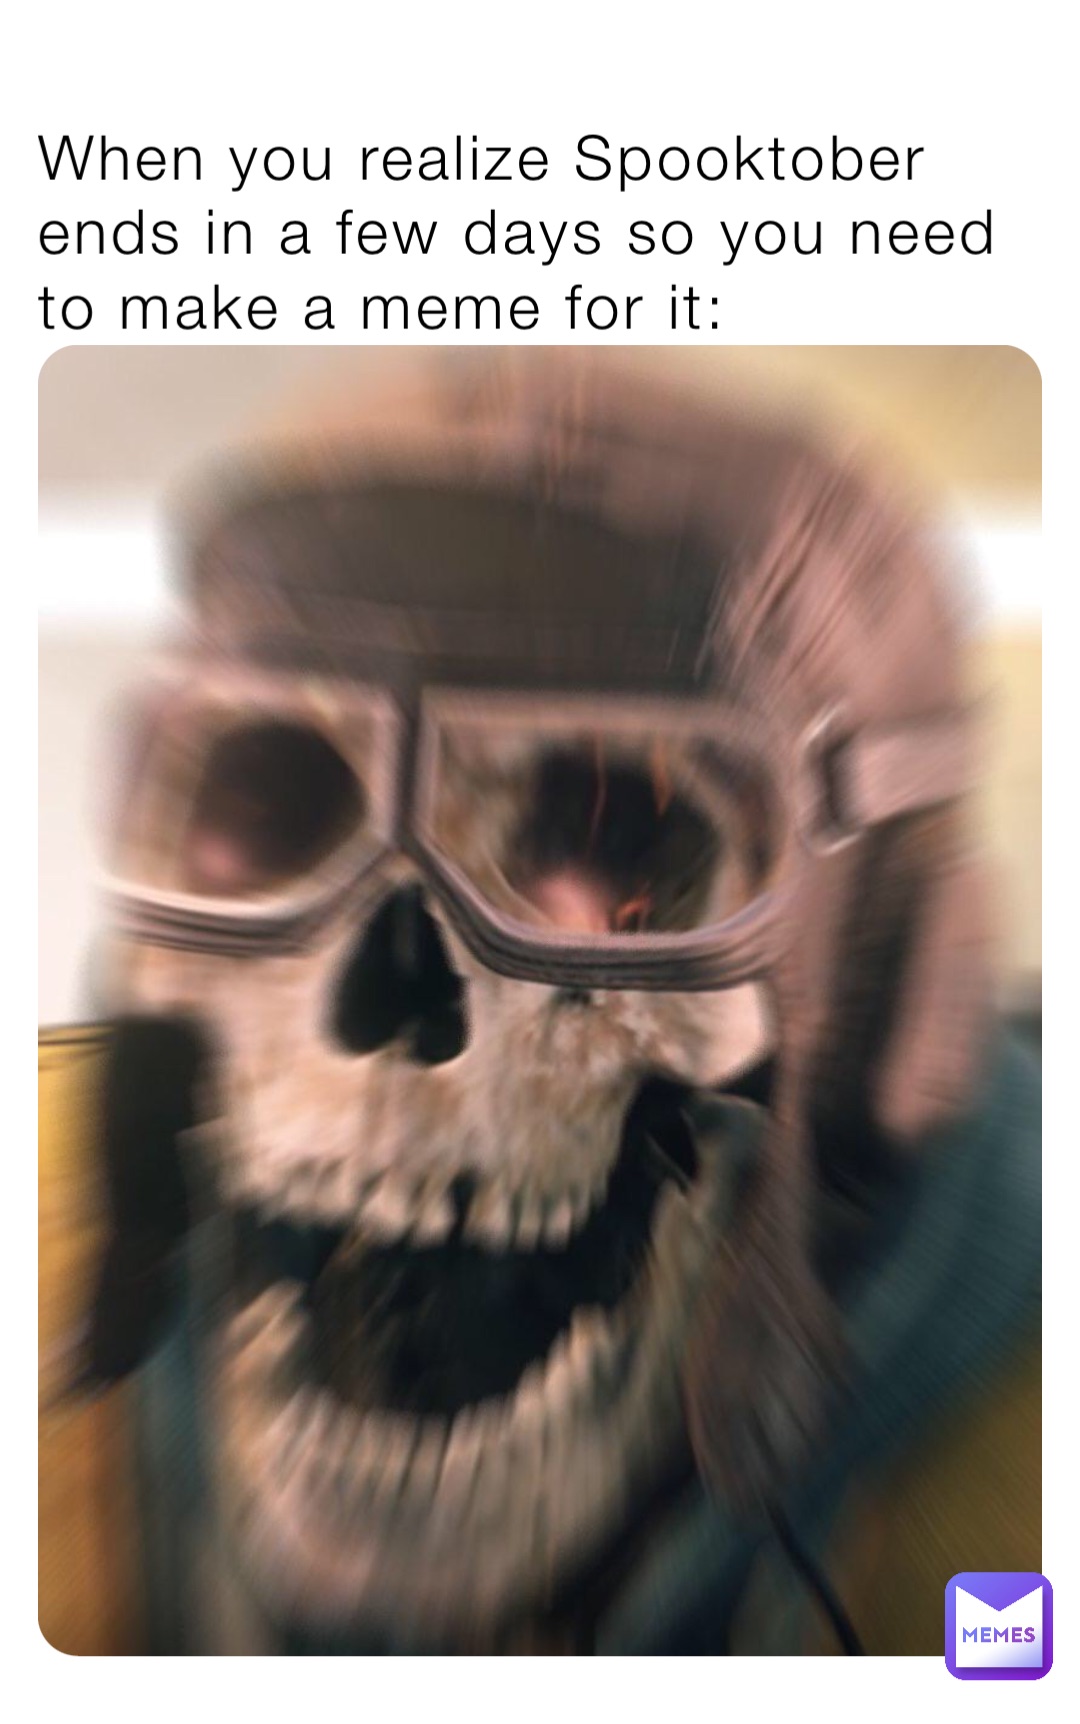 When you realize Spooktober ends in a few days so you need to make a meme for it: